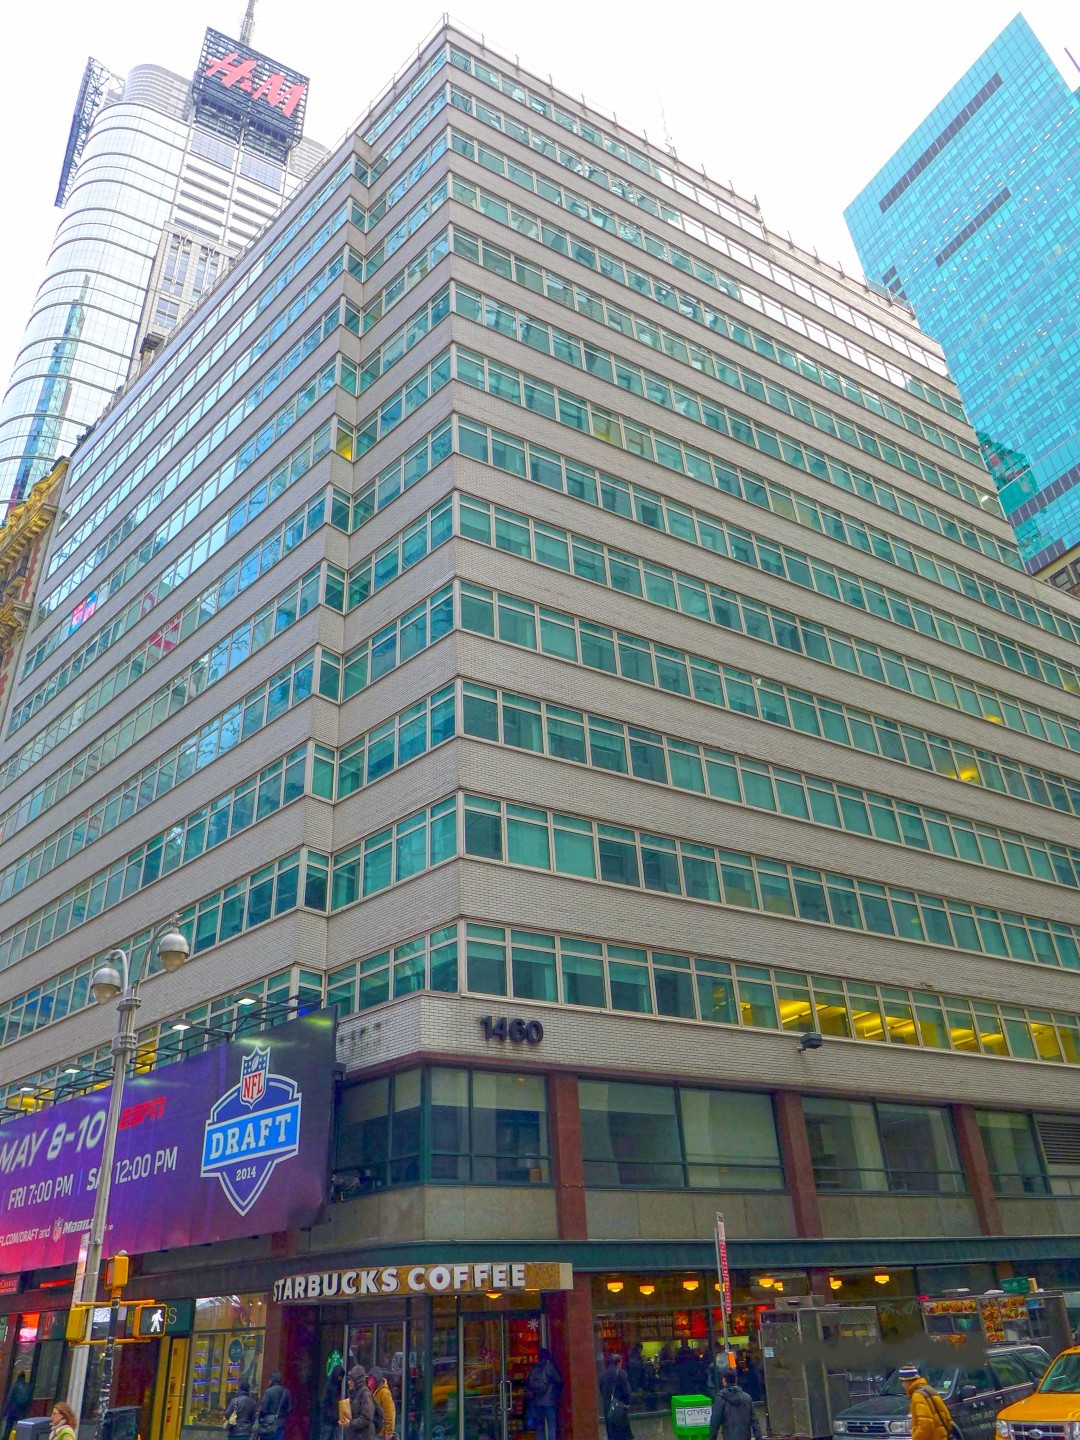 Street view of an office building in Times Square